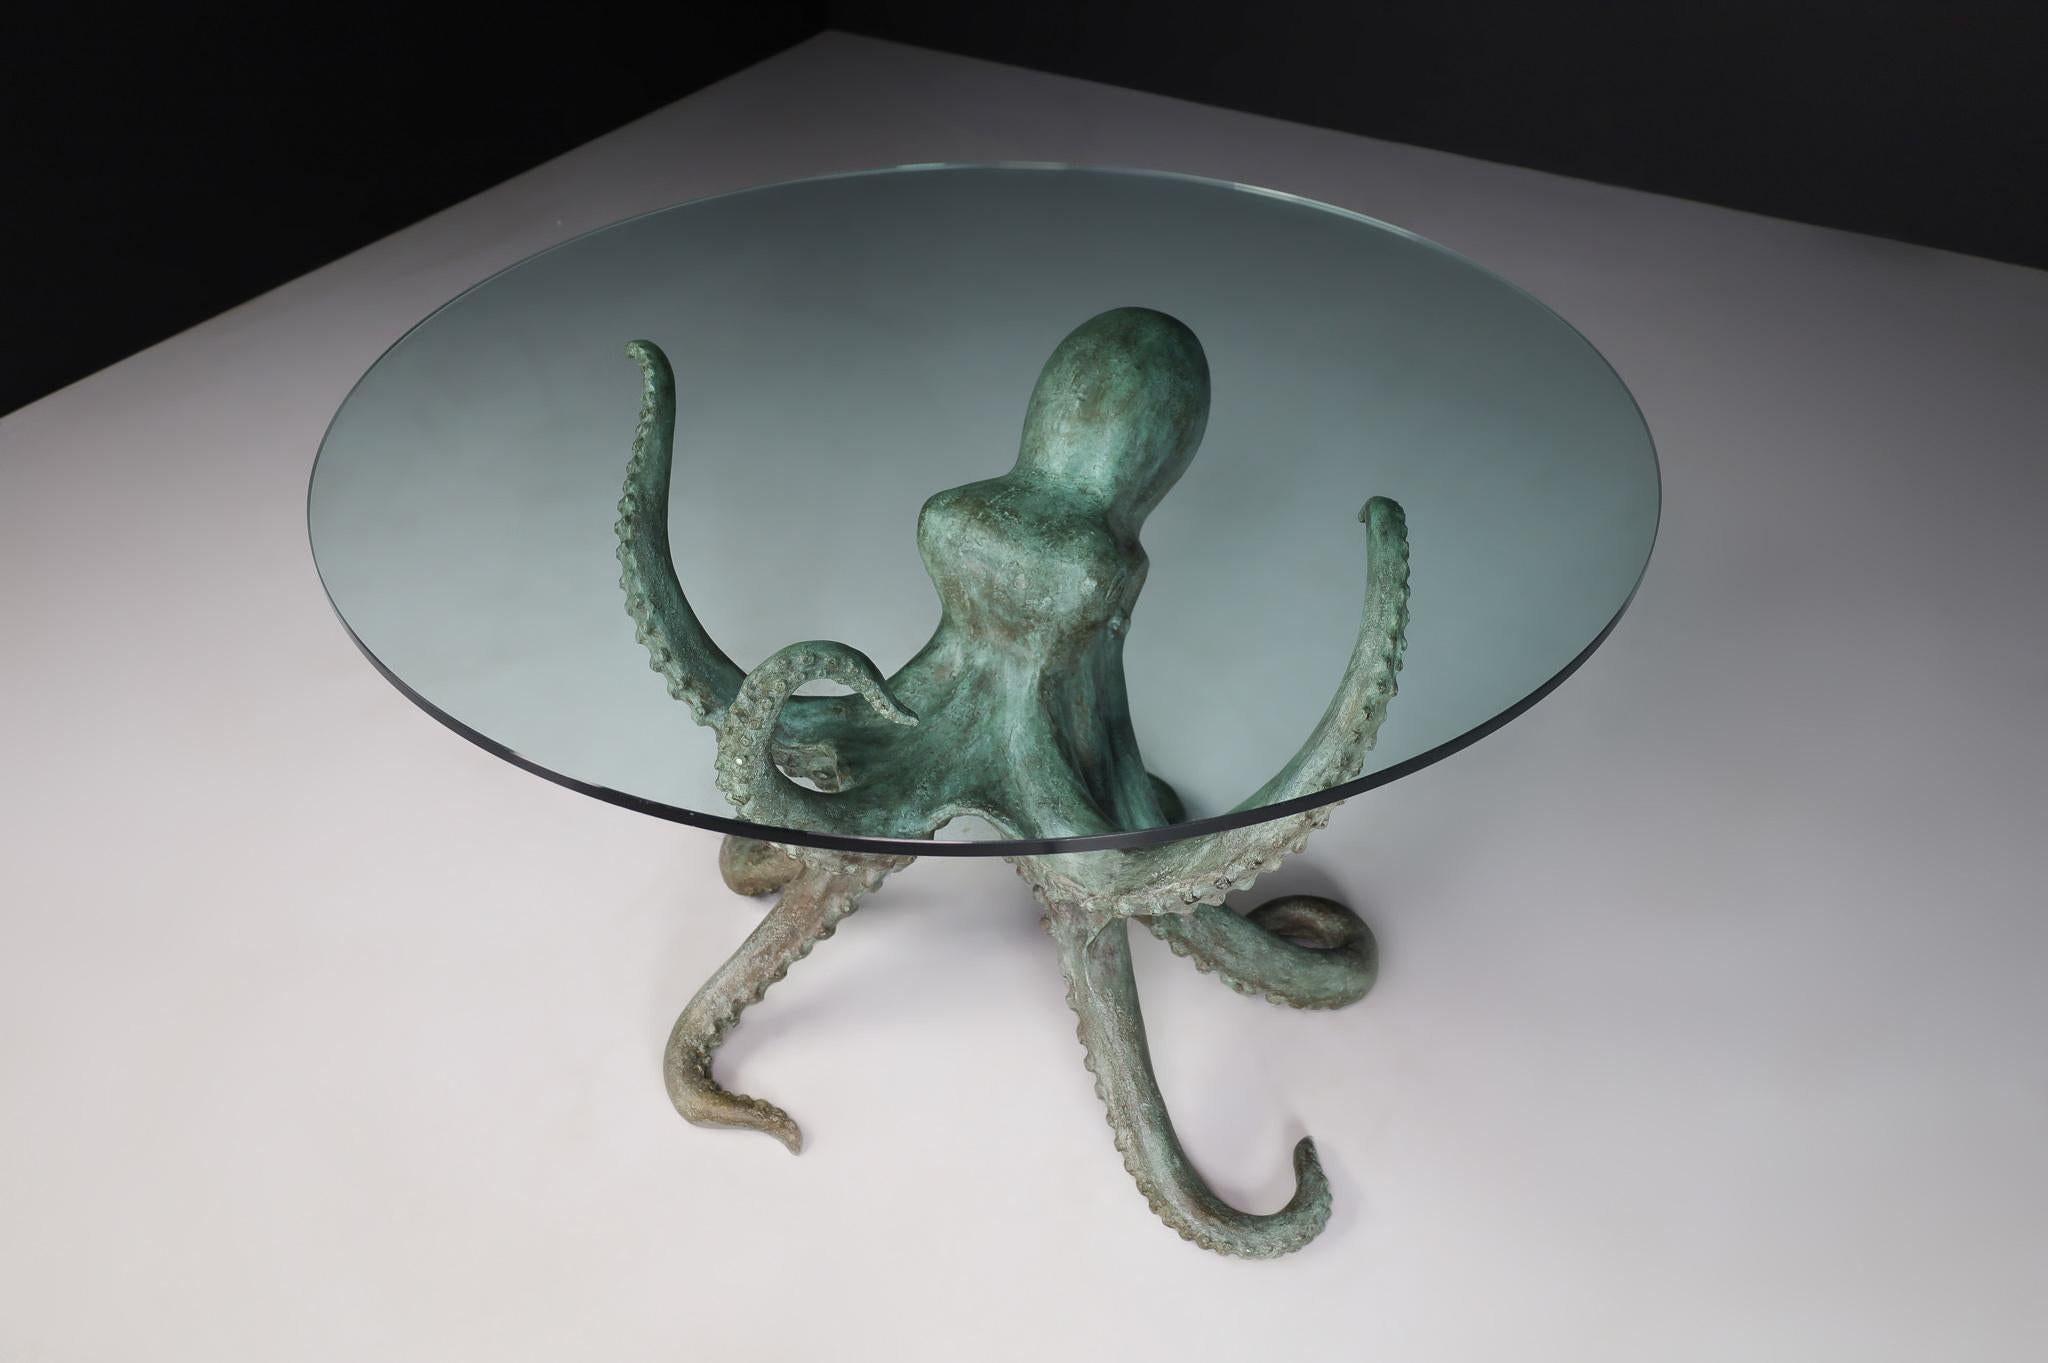 Patinated Bronze Octopus Table or Sculpture, 1970s Italy

This fabulous dining table in the shape of an octopus is made in Italy. The base of the table is a bronze octopus with 3 tentacles propped up the glass top and 5 on the floor. Not only does